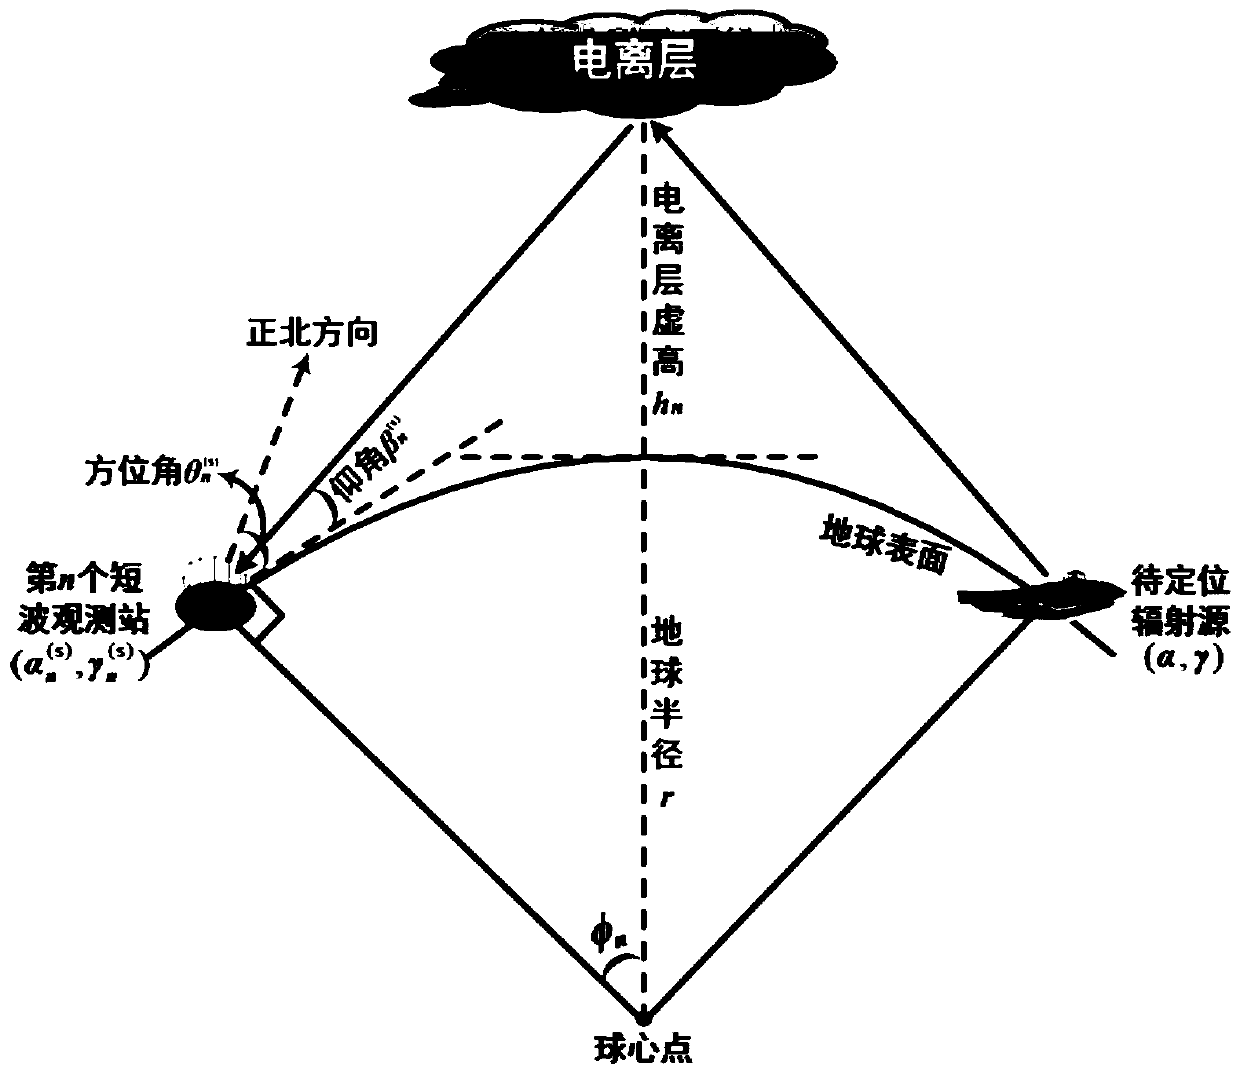 Short-wave multi-station and single-satellite cooperative direct positioning method based on two-dimensional direction of arrival